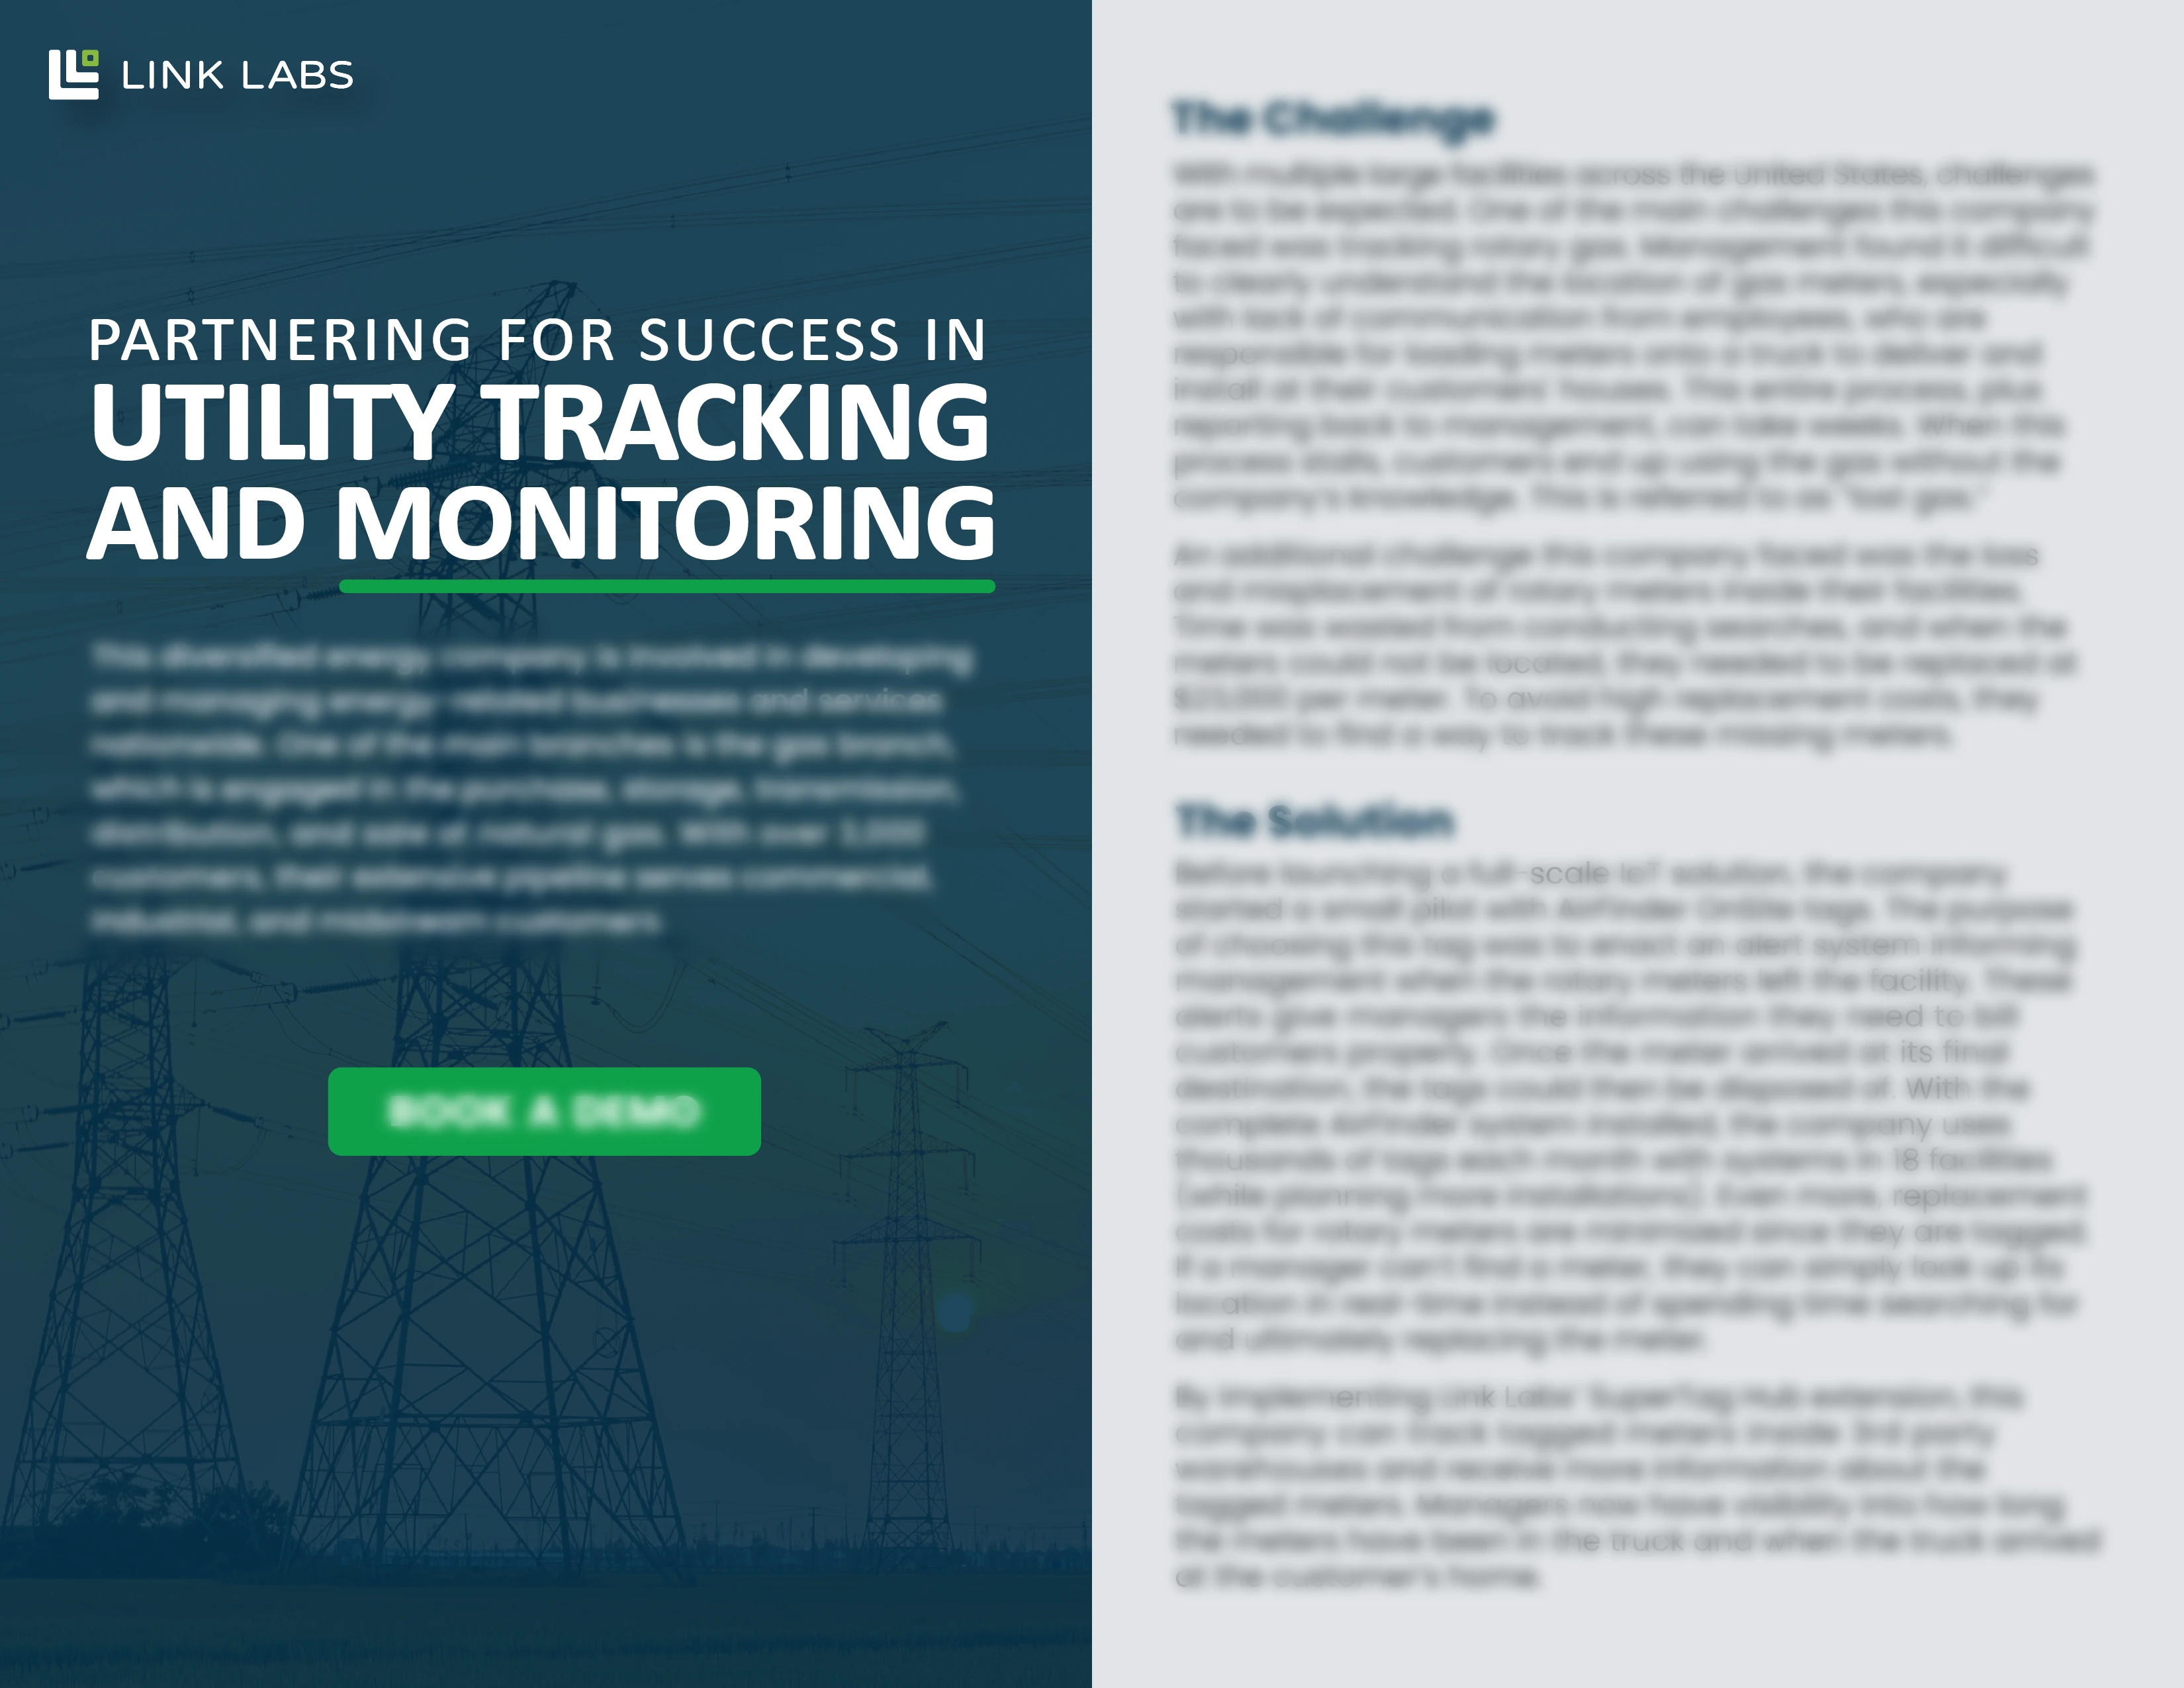 Utility tracking and monitoring